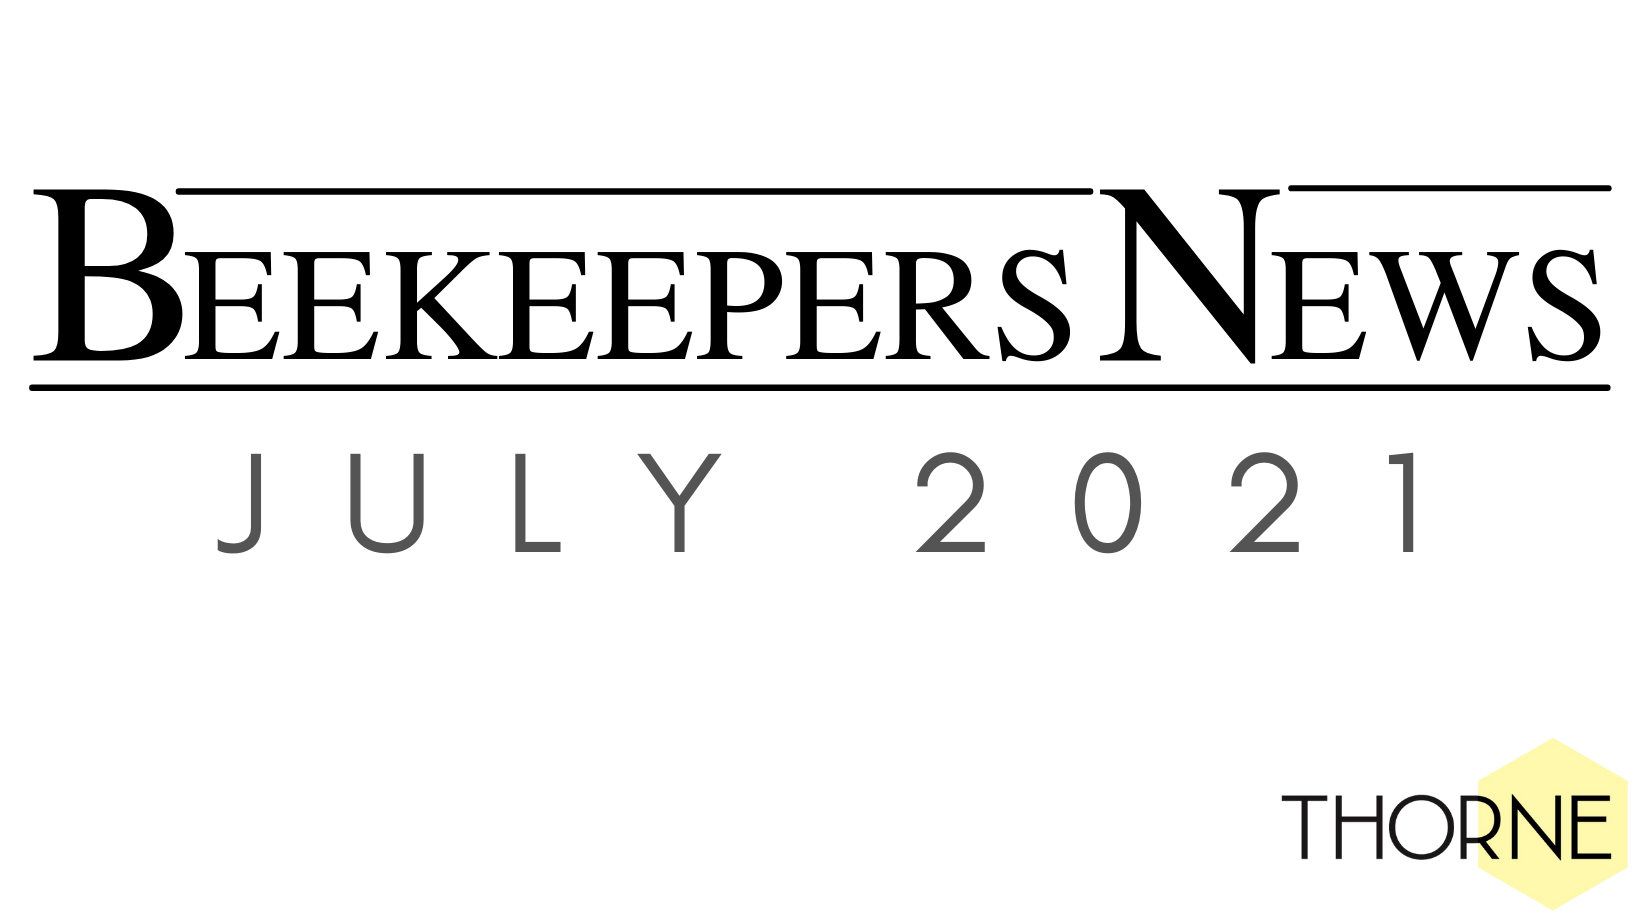 Beekeepers News - July 2021 - Issue 58